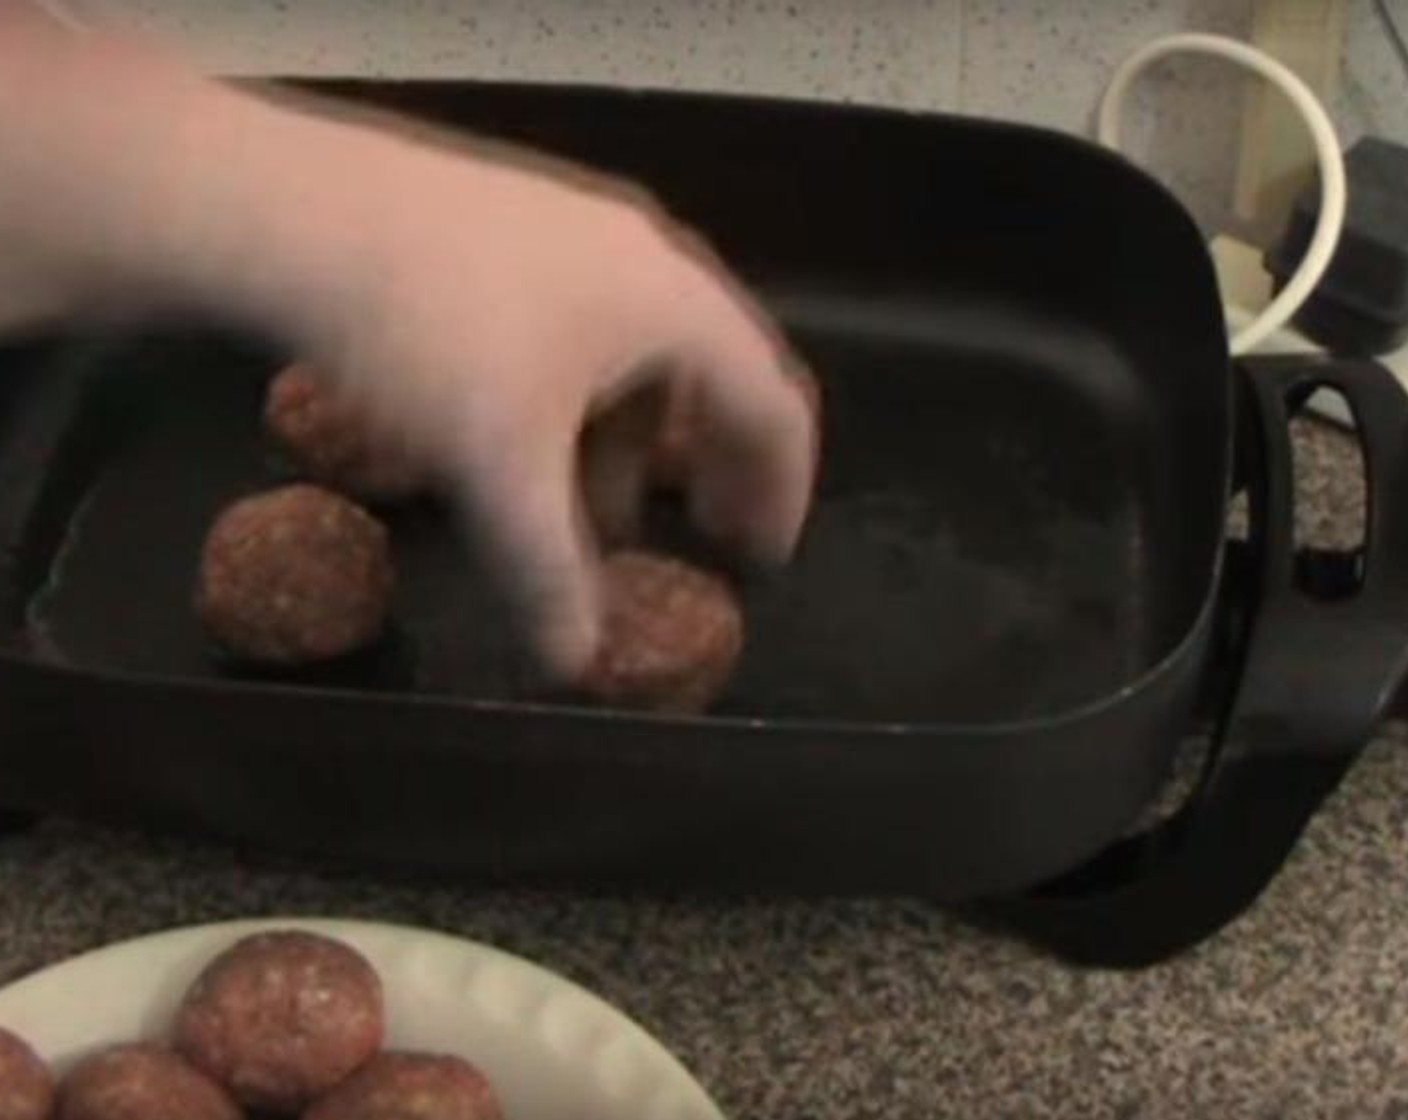 step 3 Drop the meatballs into a heated fry pan, four at a time. Cook them for 5 to 6 minutes, turning them occasionally. After cooking, transfer the balls onto a baking dish.